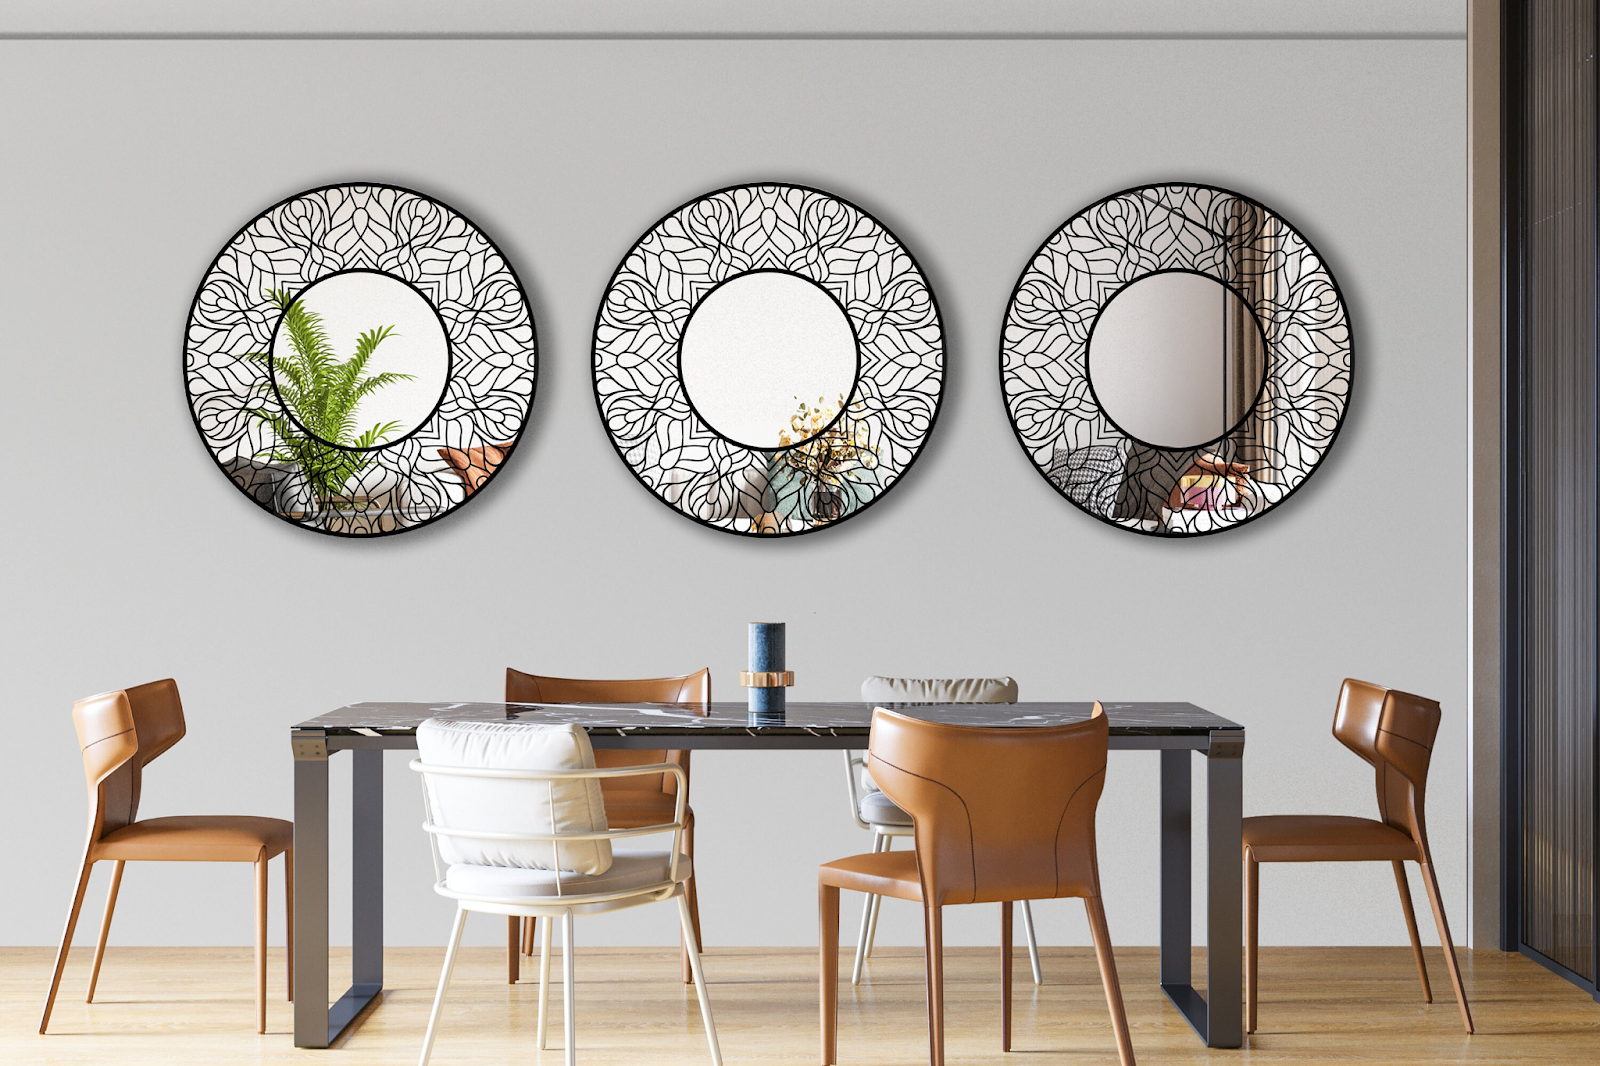 Statement Mirrors for Living Room